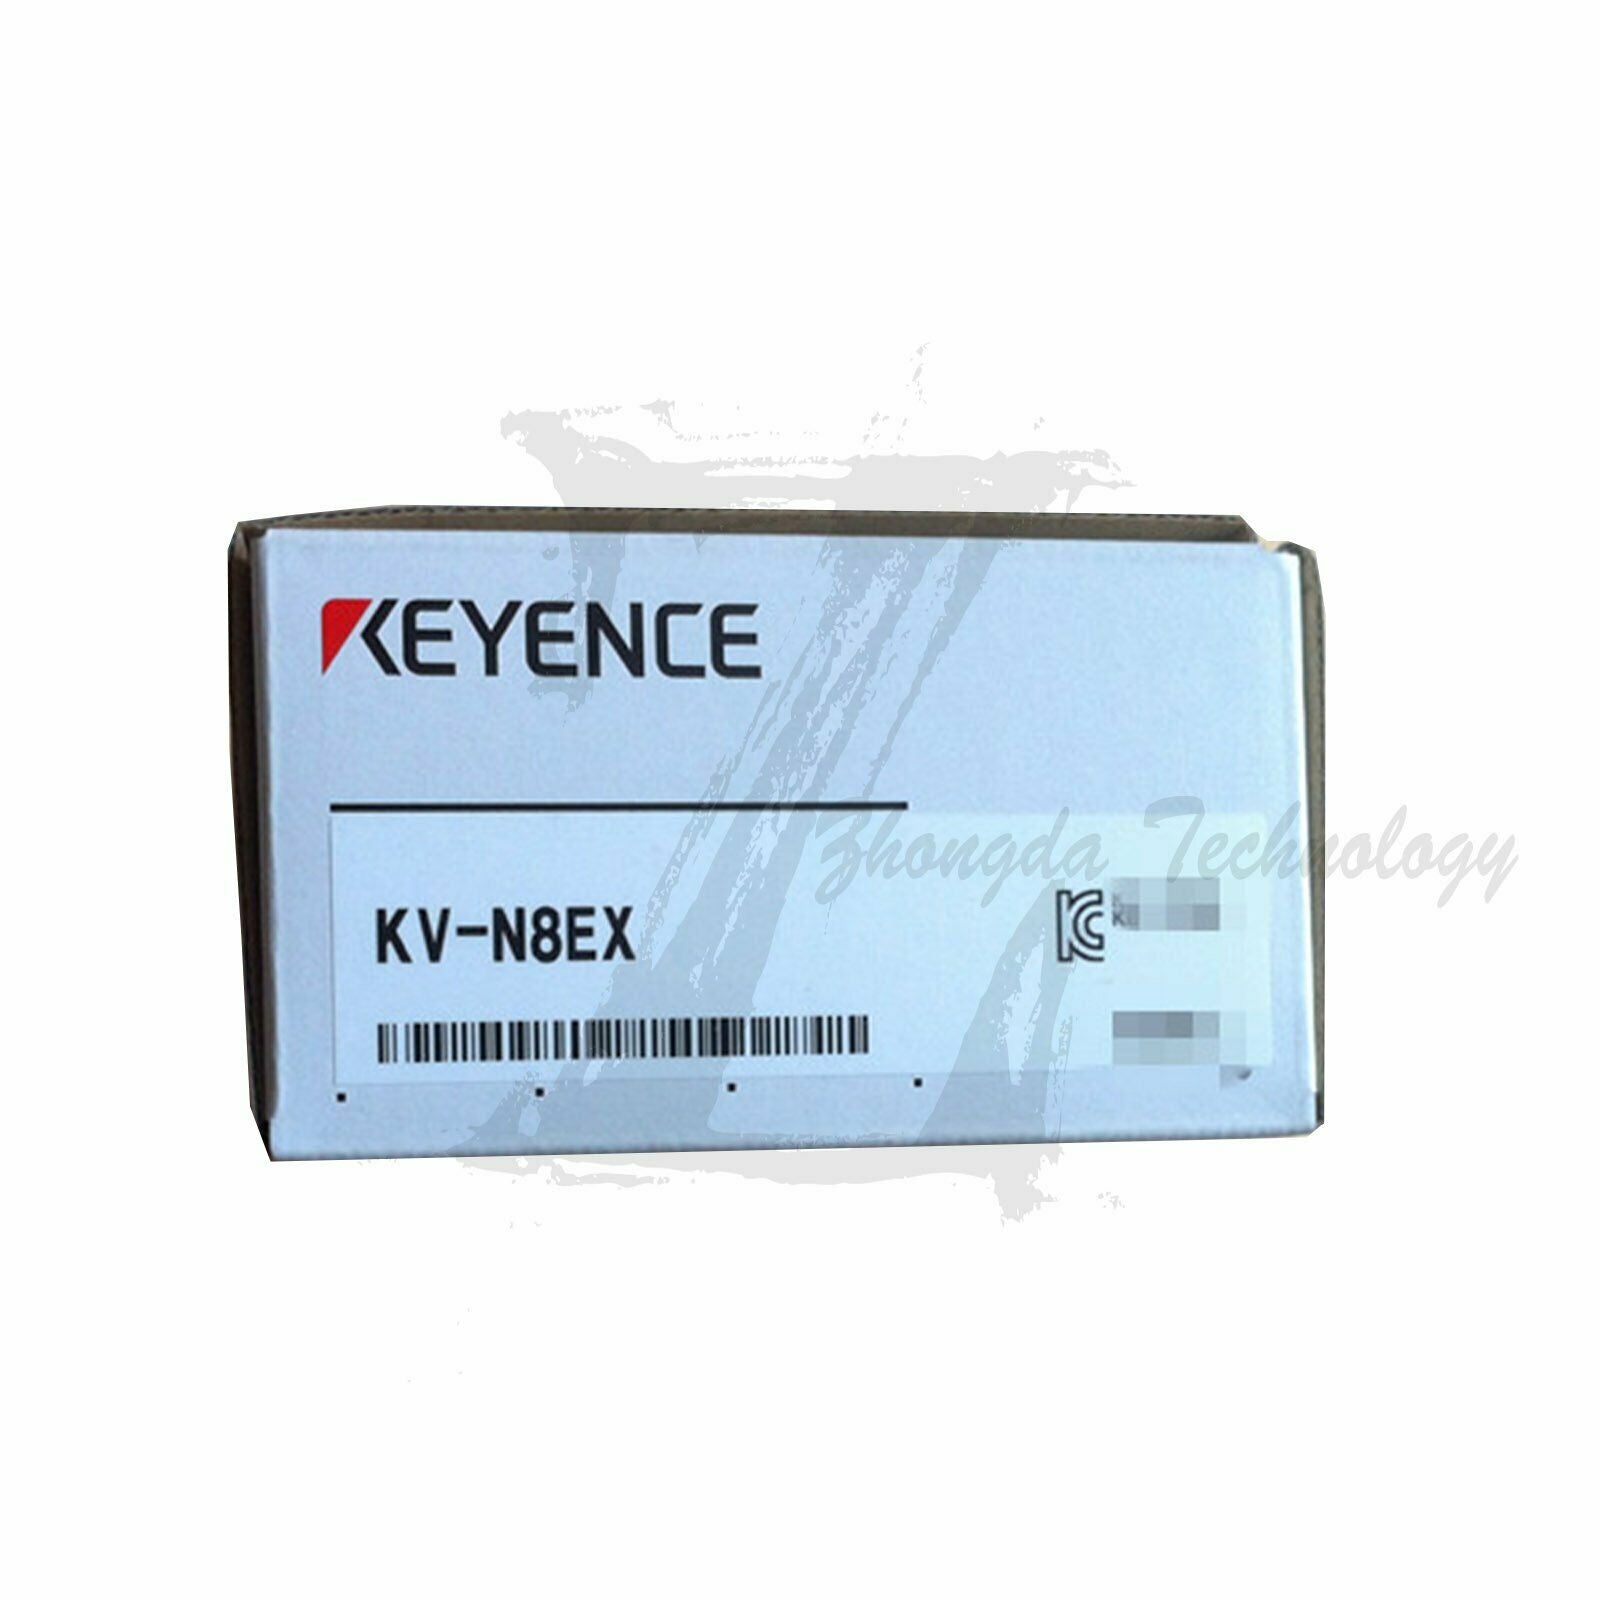 1pcs NEW KEYENCE KV-N8EX Programmable Controllers KOEED 201-500, 90%, import_2020_10_10_031751, Keyence, Other, validate-product-description